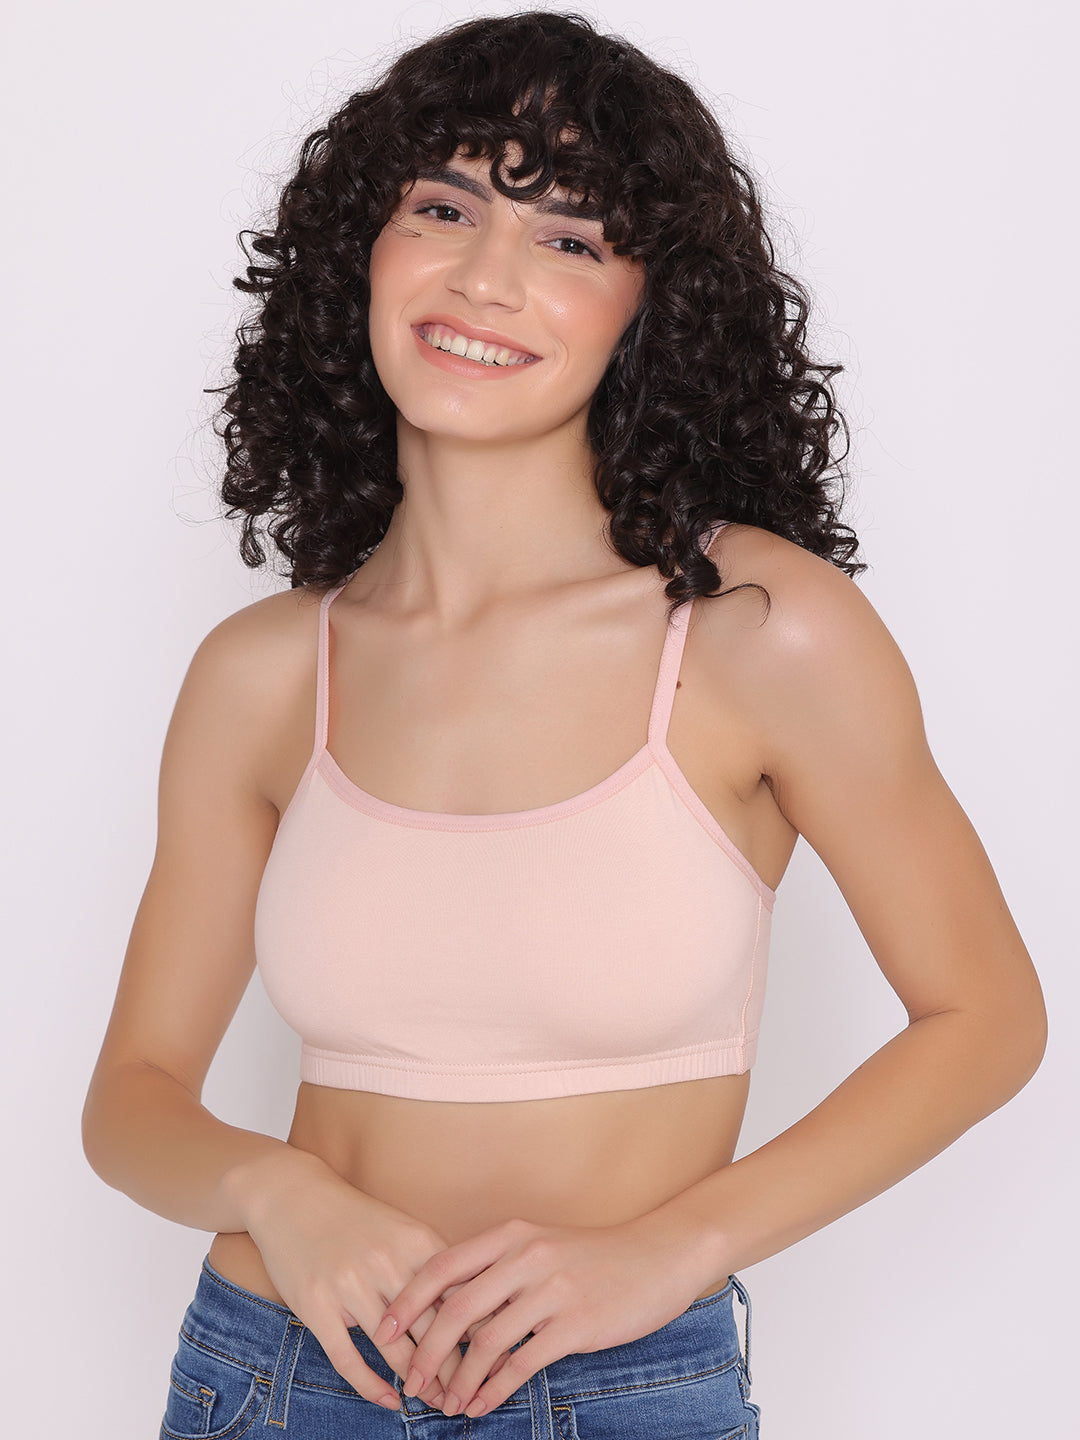 Buy Qiwion Teen Girls Seamless Non-Wired Comfortable Crop Top Bra Combo